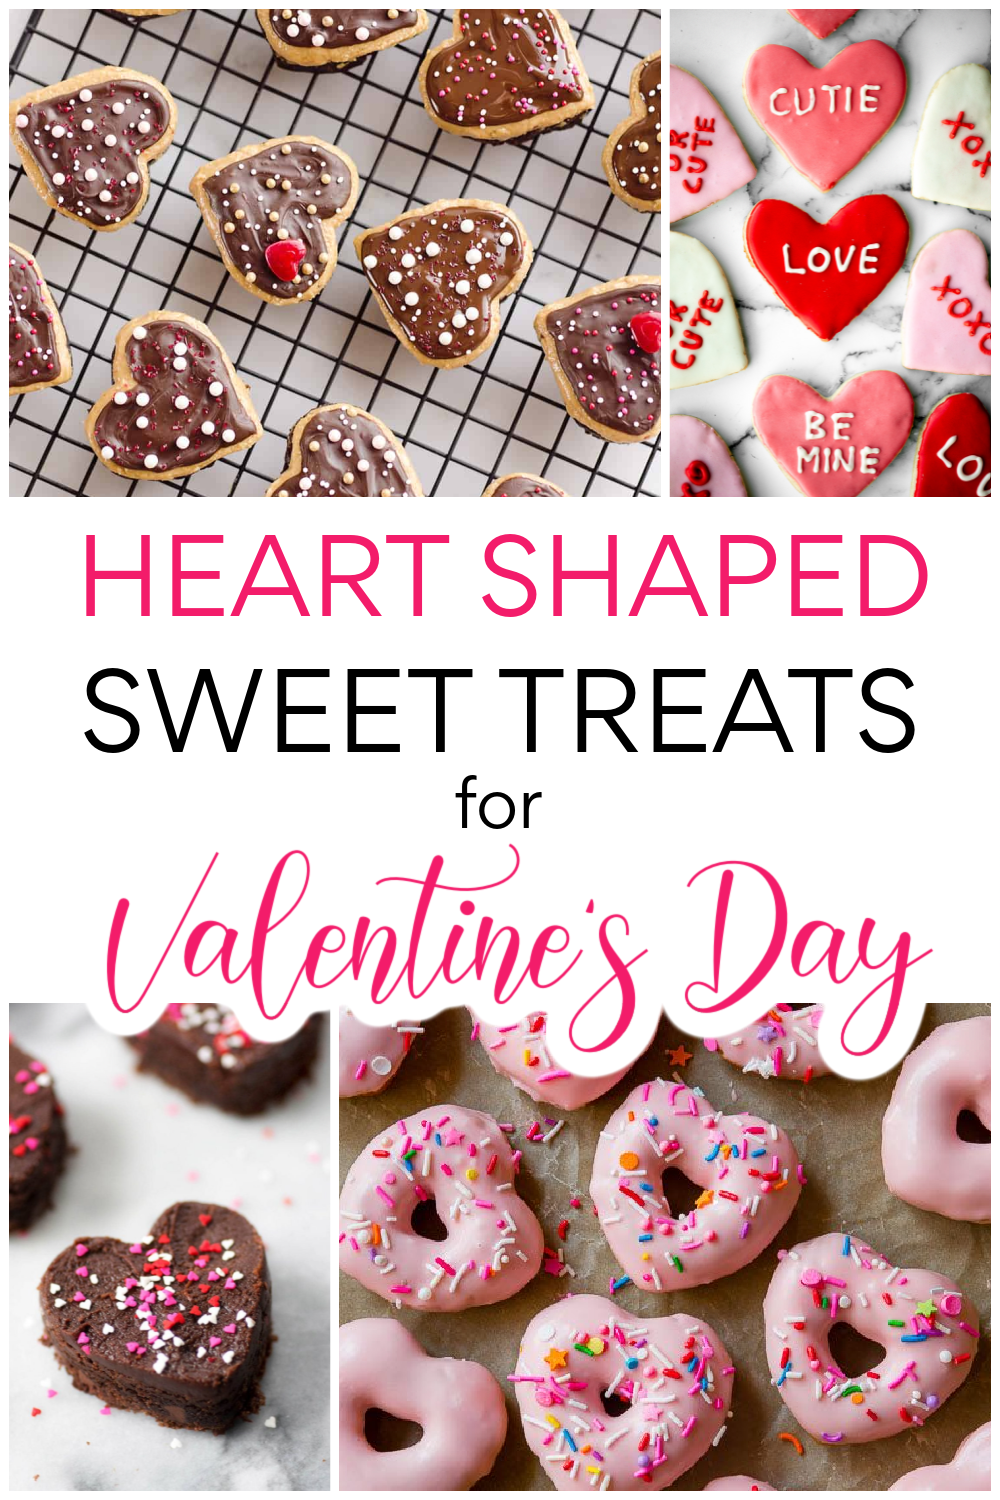 20 Heart Shaped Sweet Treats For Valentine's Day